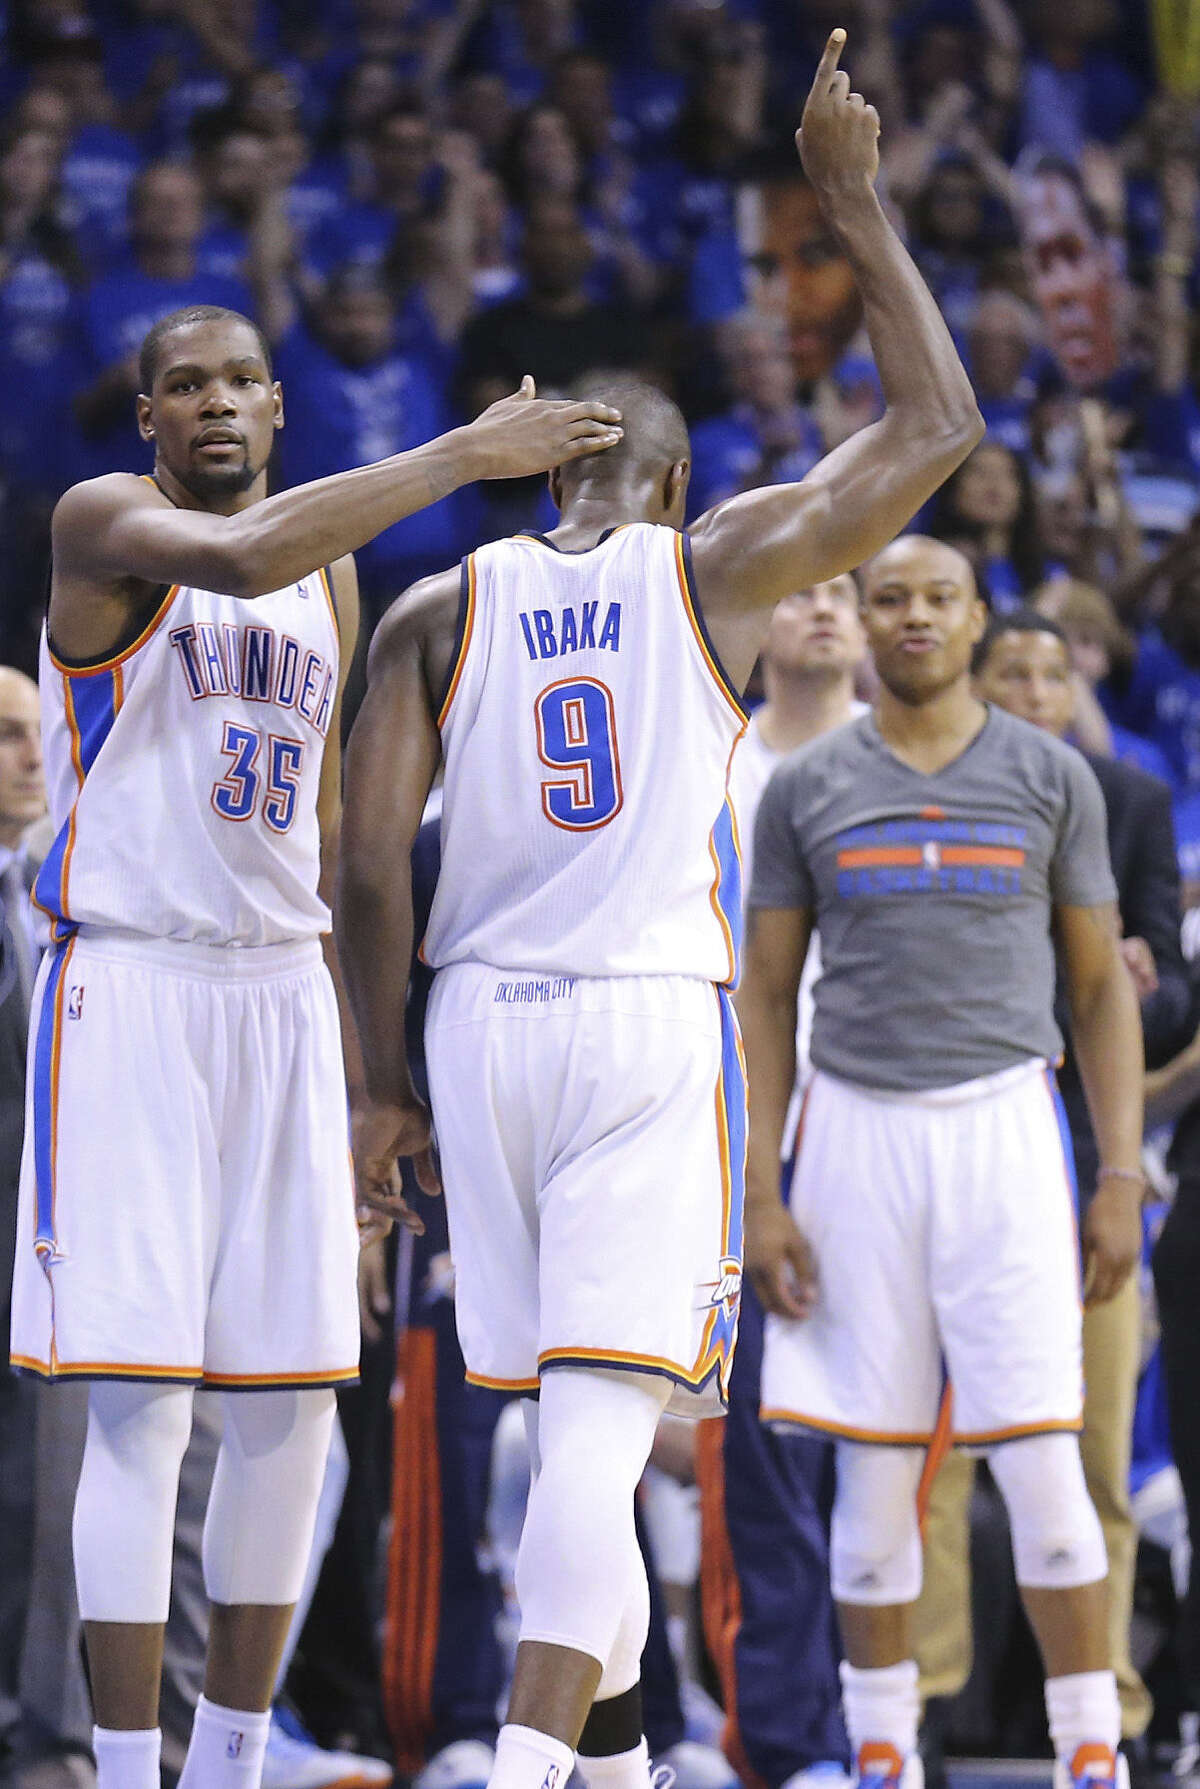 Thunder forward Serge Ibaka limped at times Sunday night, but his effort earned a congratulatory pat from Kevin Durant.